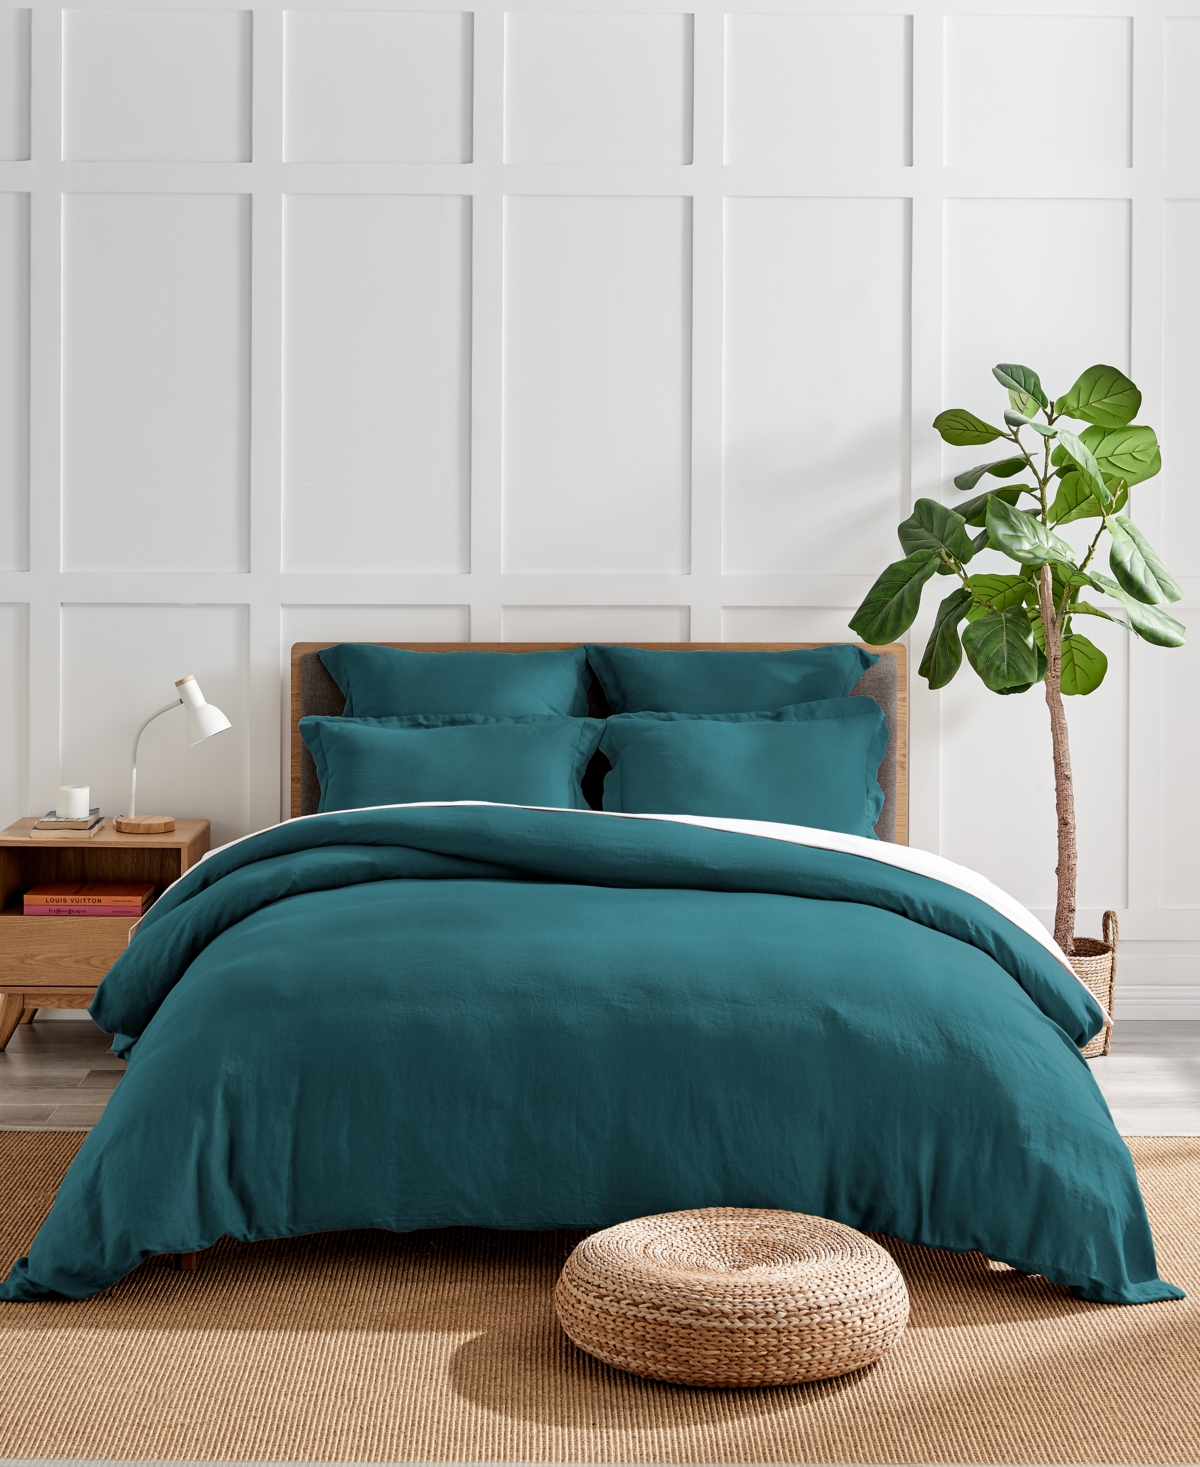 Levtex Washed Linen Solid Duvet Cover, King/california King In Green